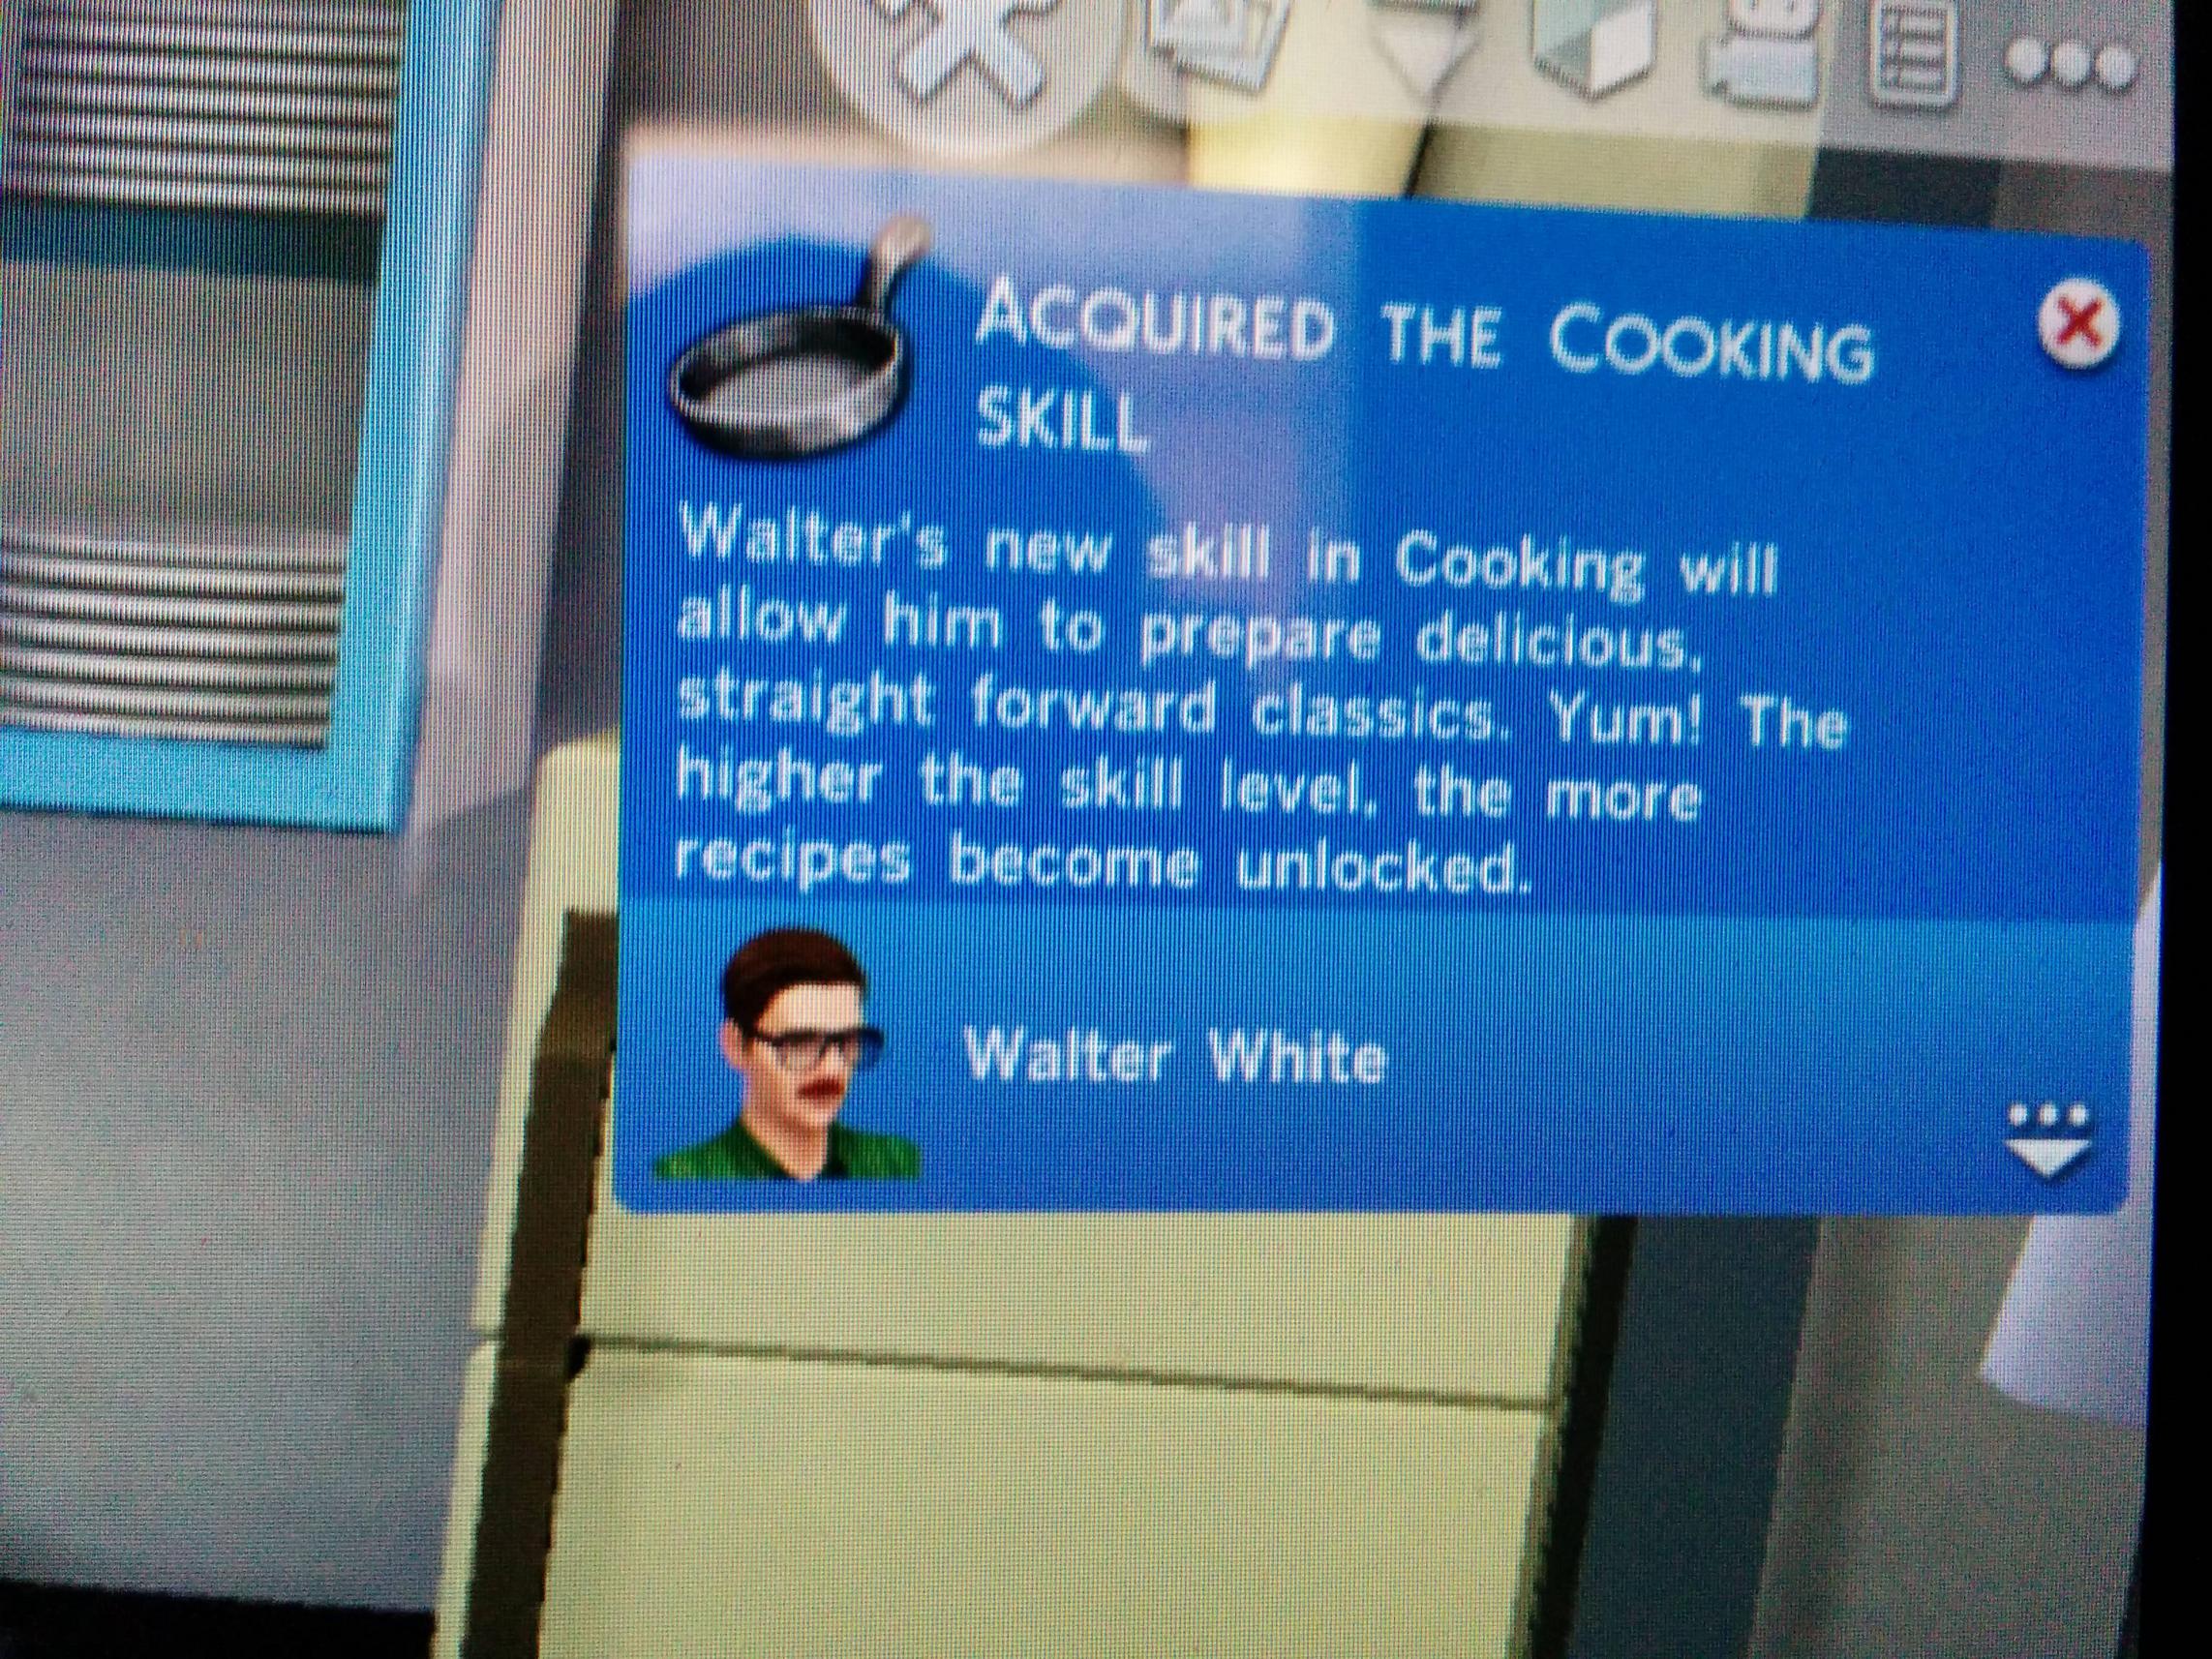 display device - E... Acquired The Cooking Skill Walter's new skill in Cooking will allow him to prepare delicious, straight forward classics. Yum! The higher the skill level, the more recipes become unlocked. Walter White